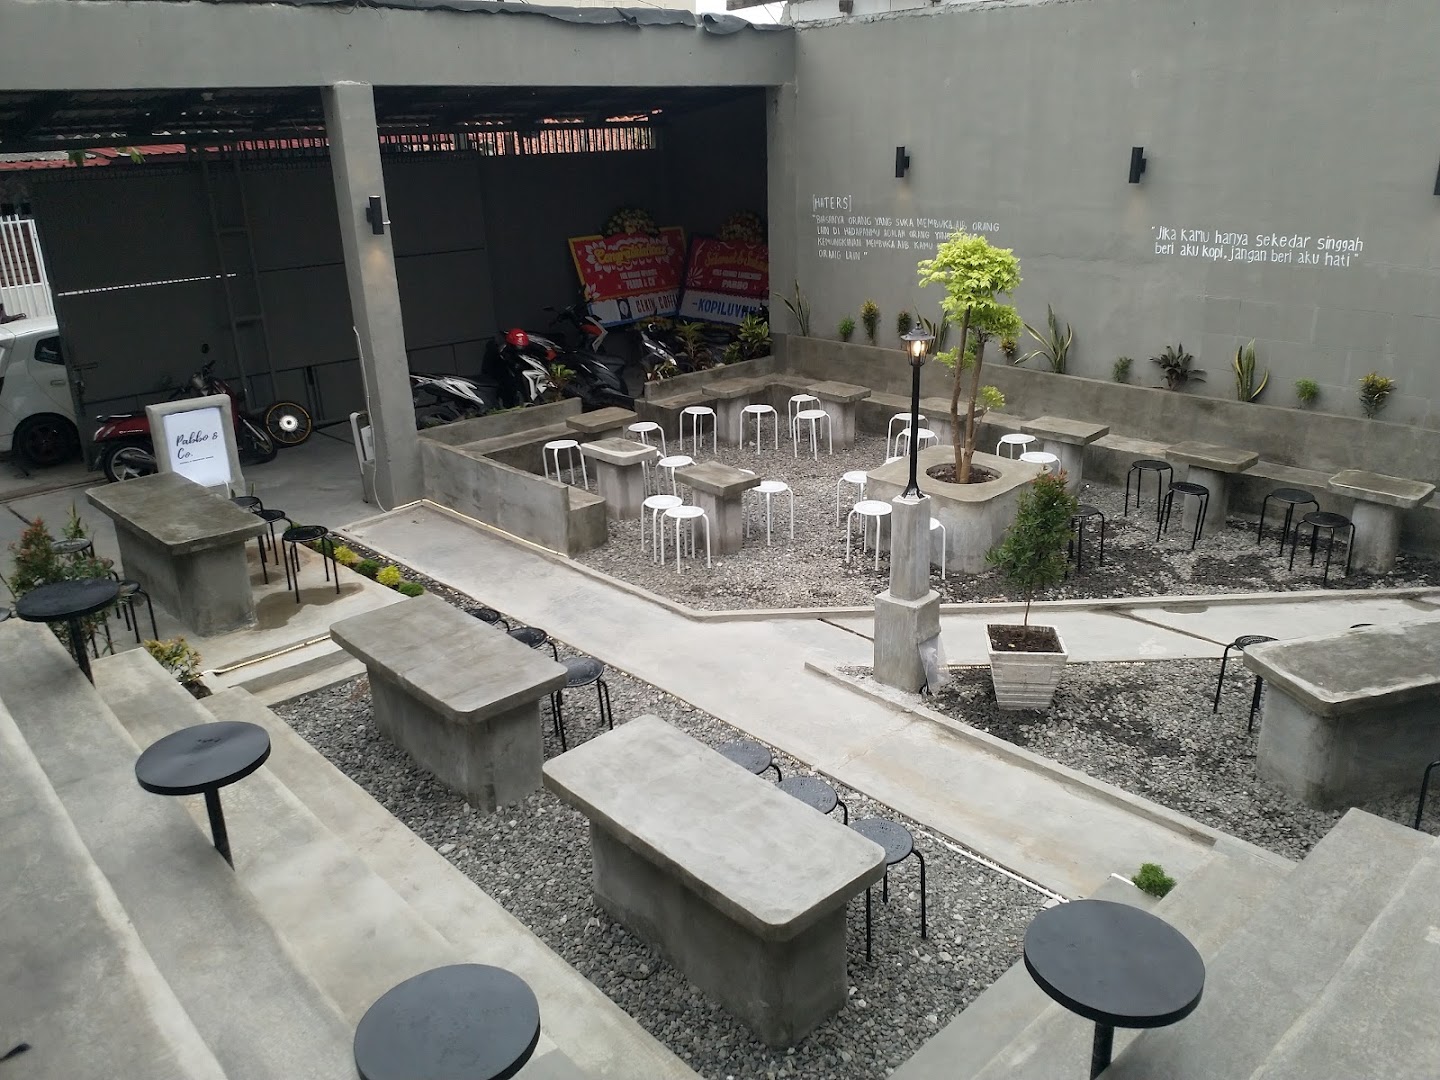 Gambar Pabbo & Co (social & Co Working Space)